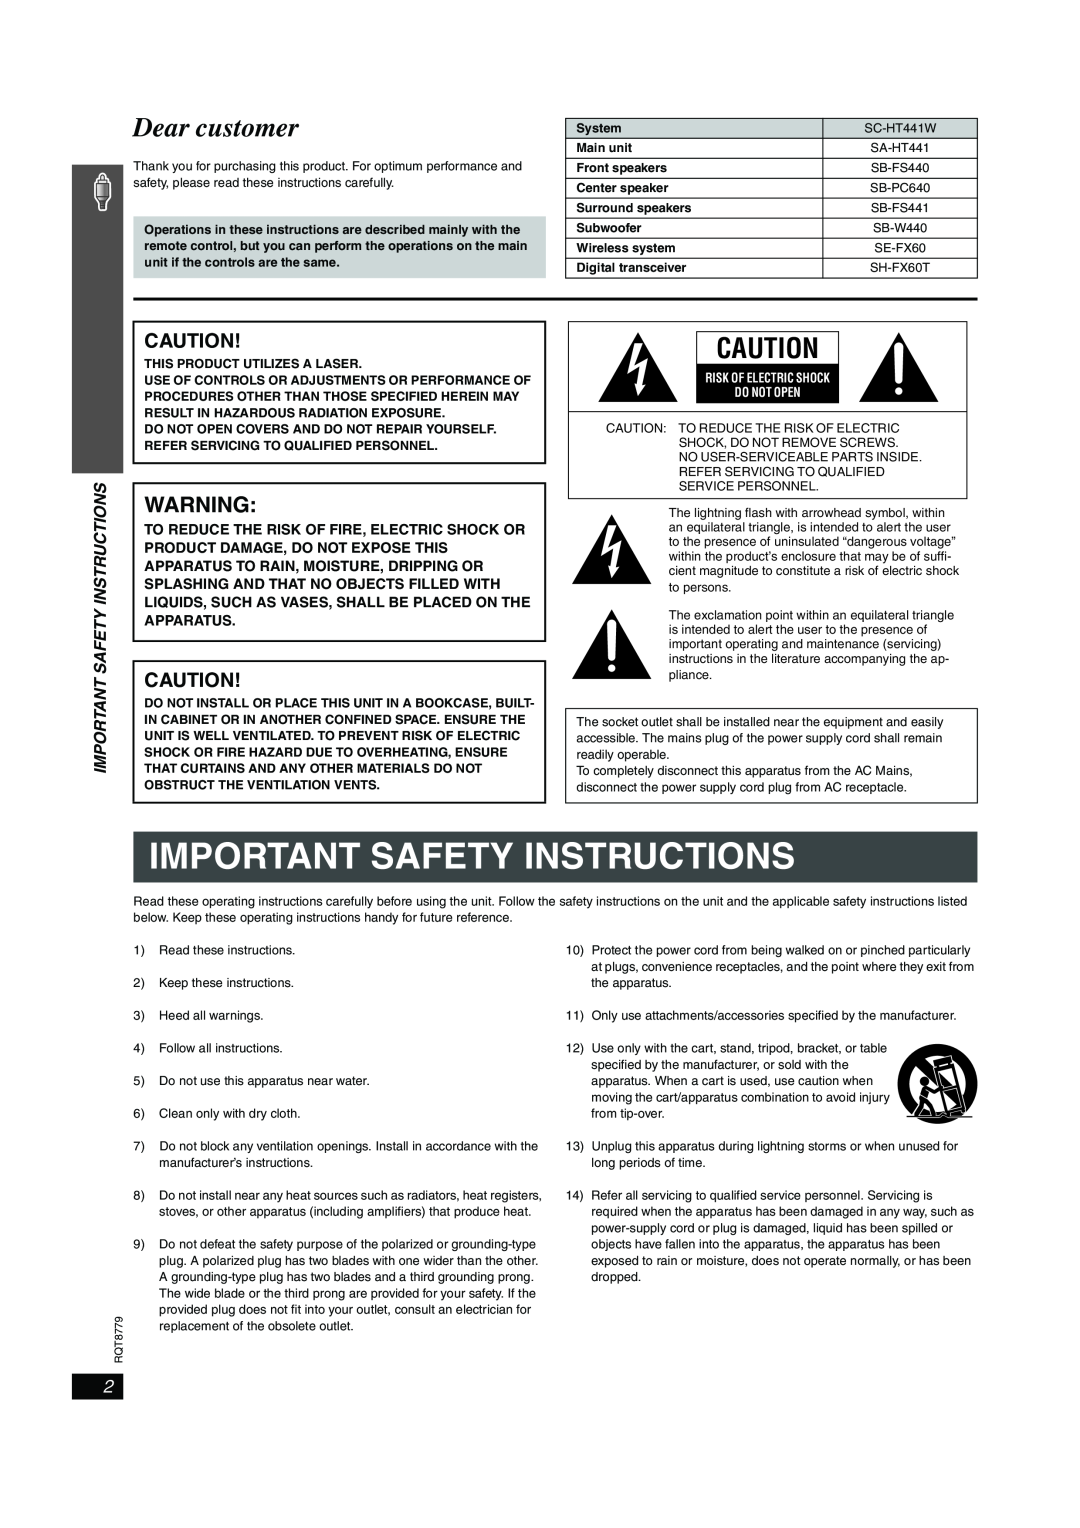 Panasonic SC-HT441W manual Important Safety Instructions, To Reduce The Risk Of Fire, Electric Shock Or, Apparatus 